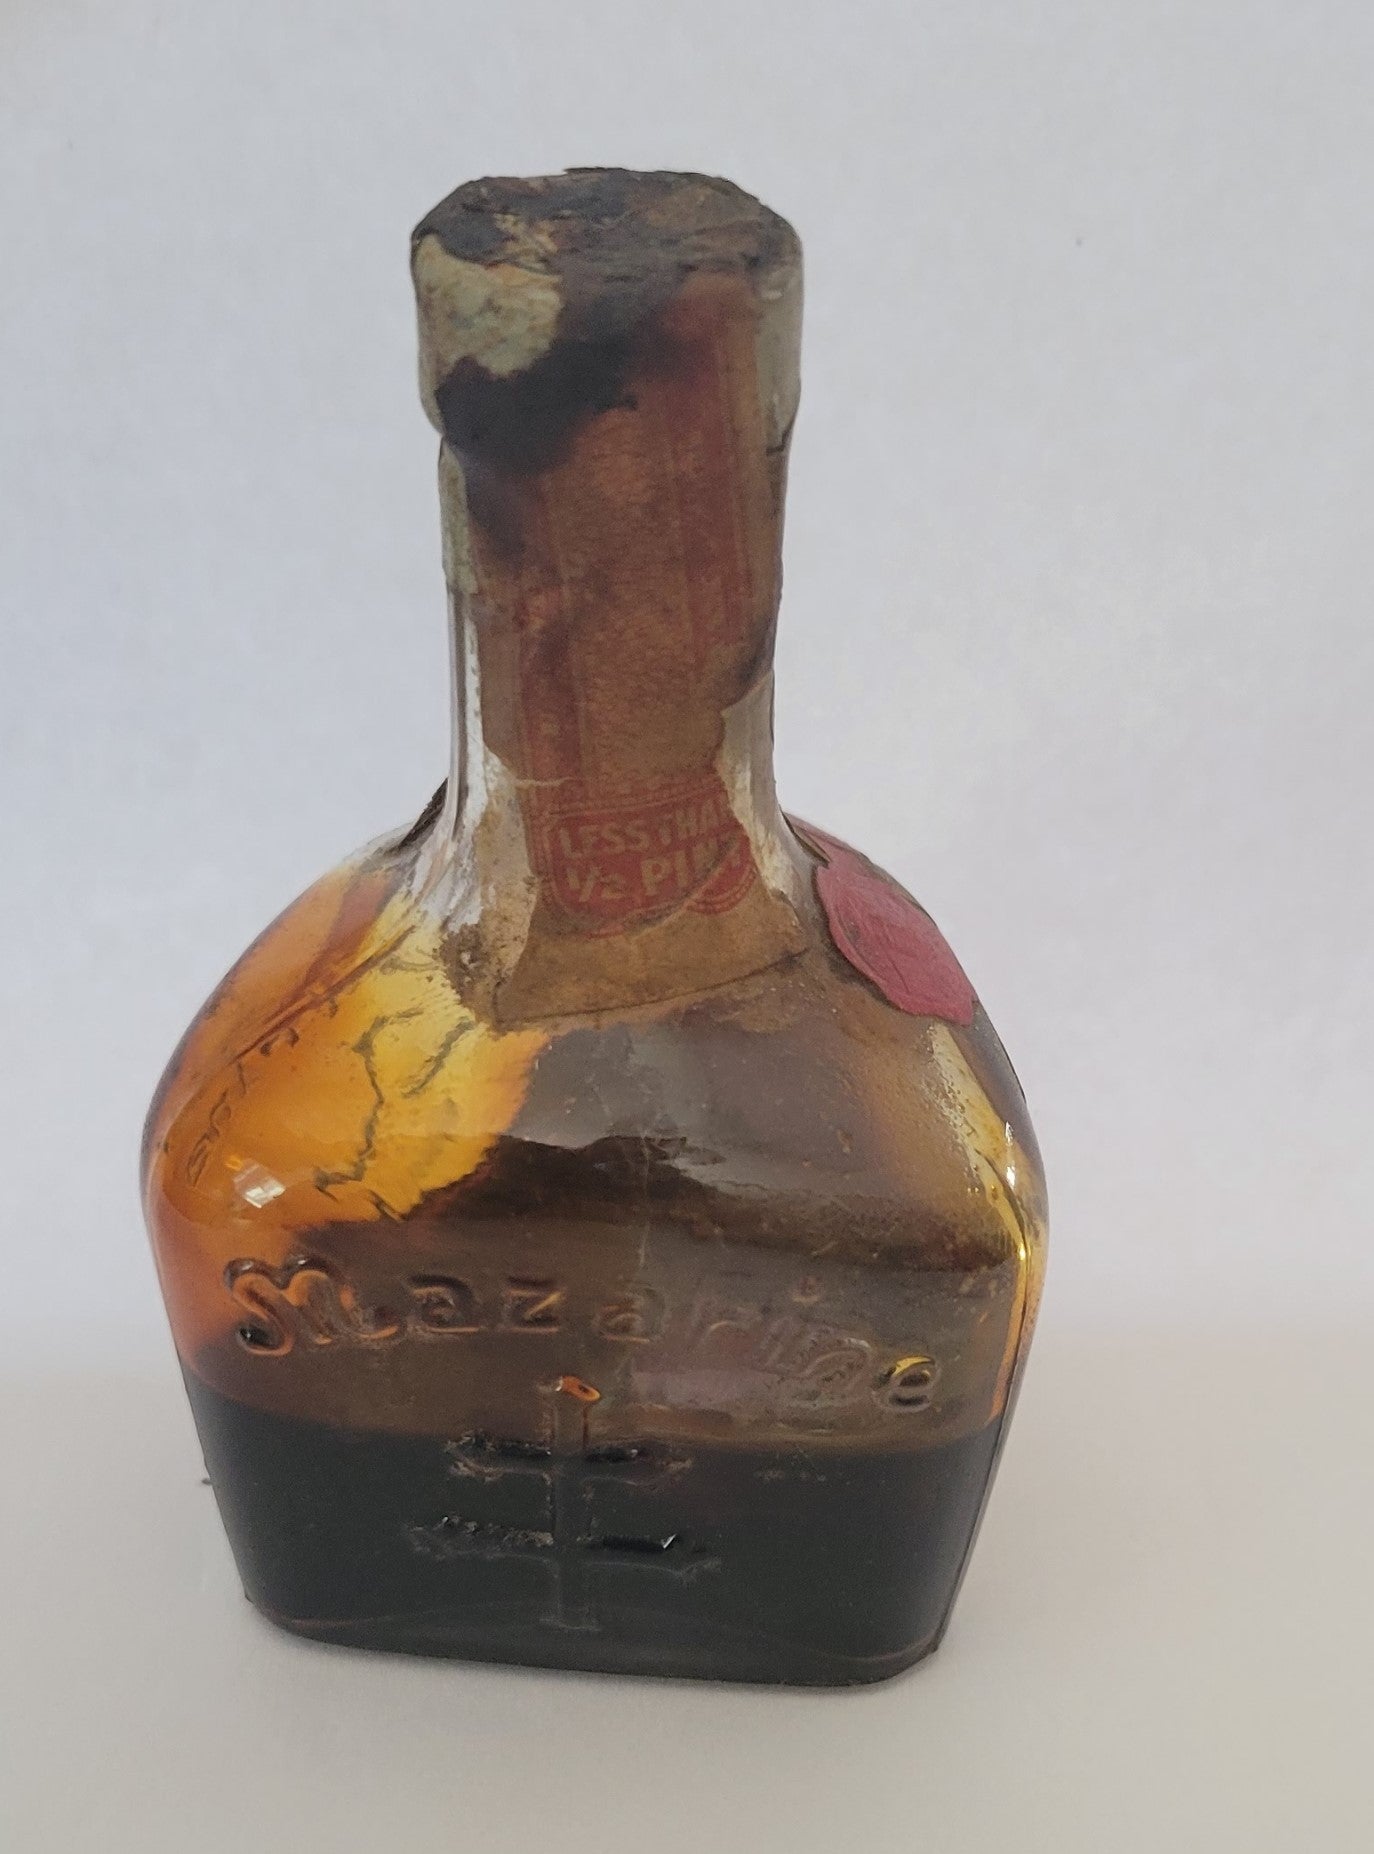 Vintage liquor bottle, little Mazarine liquor bottle from Argentina with State of Maryland Liquor Excise Tax sticker on the front. Back view.